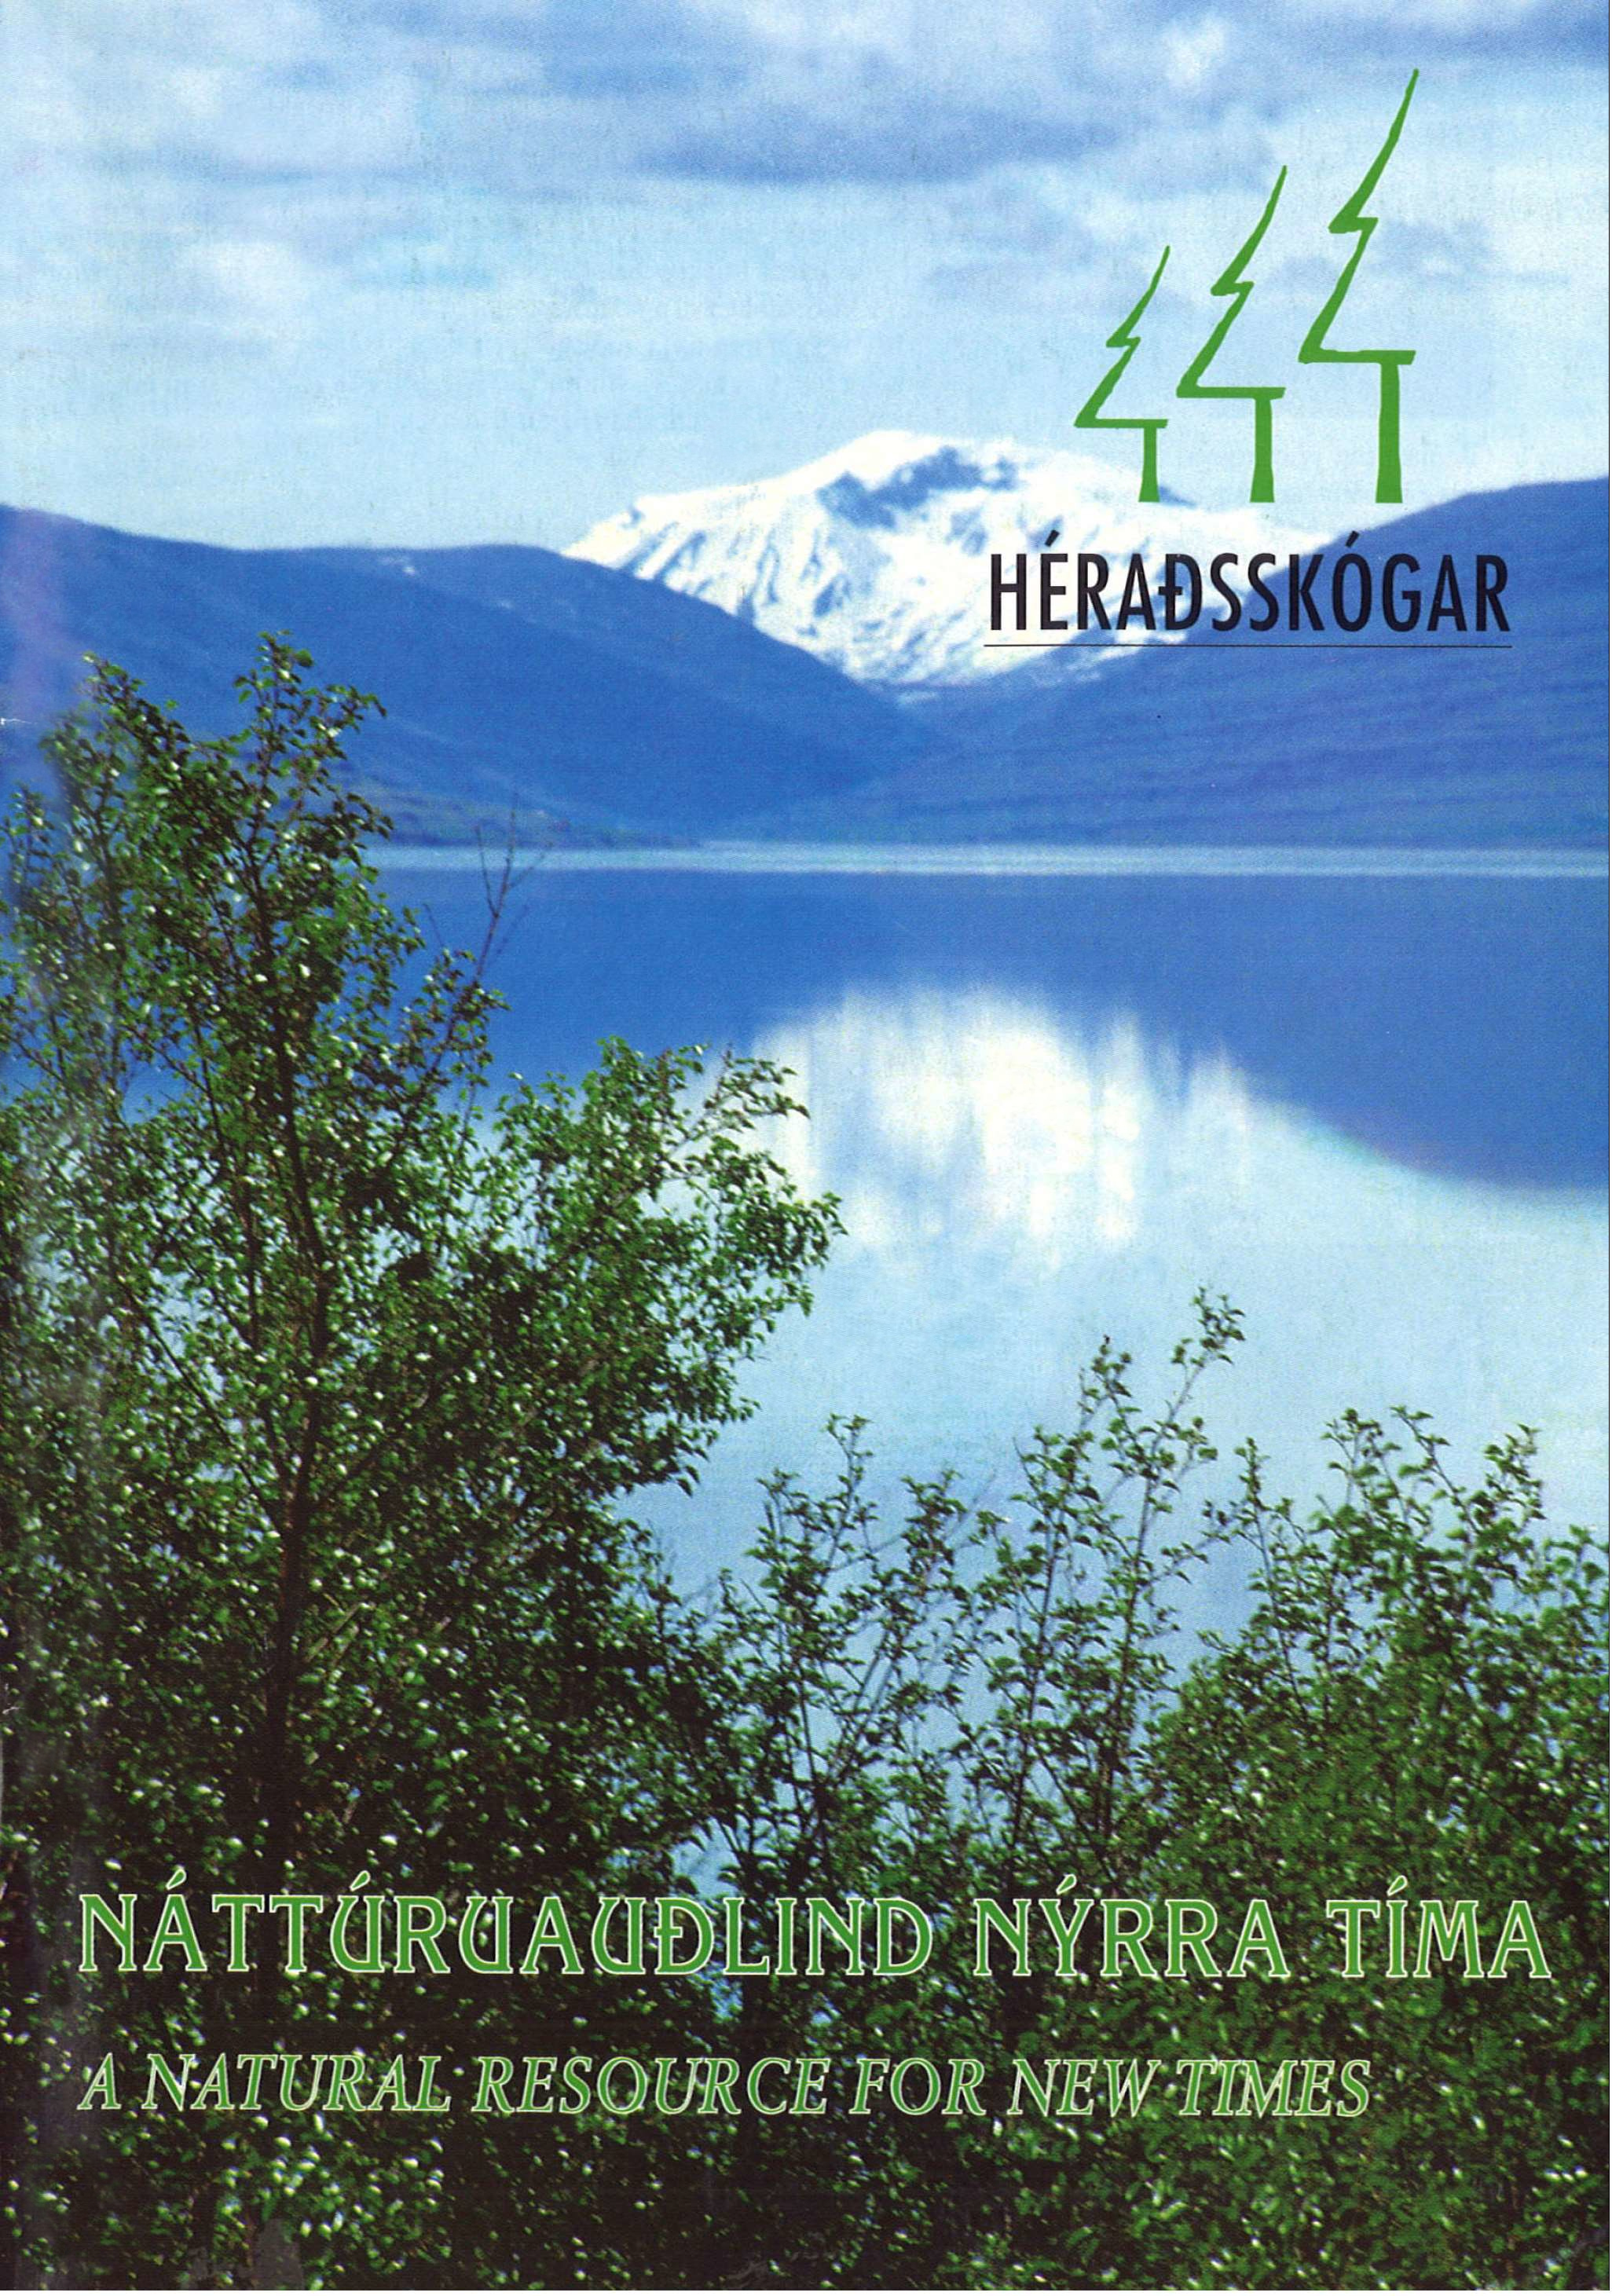 Front cover of the brochure Héraðsskógar - A Natural Resource for New Times